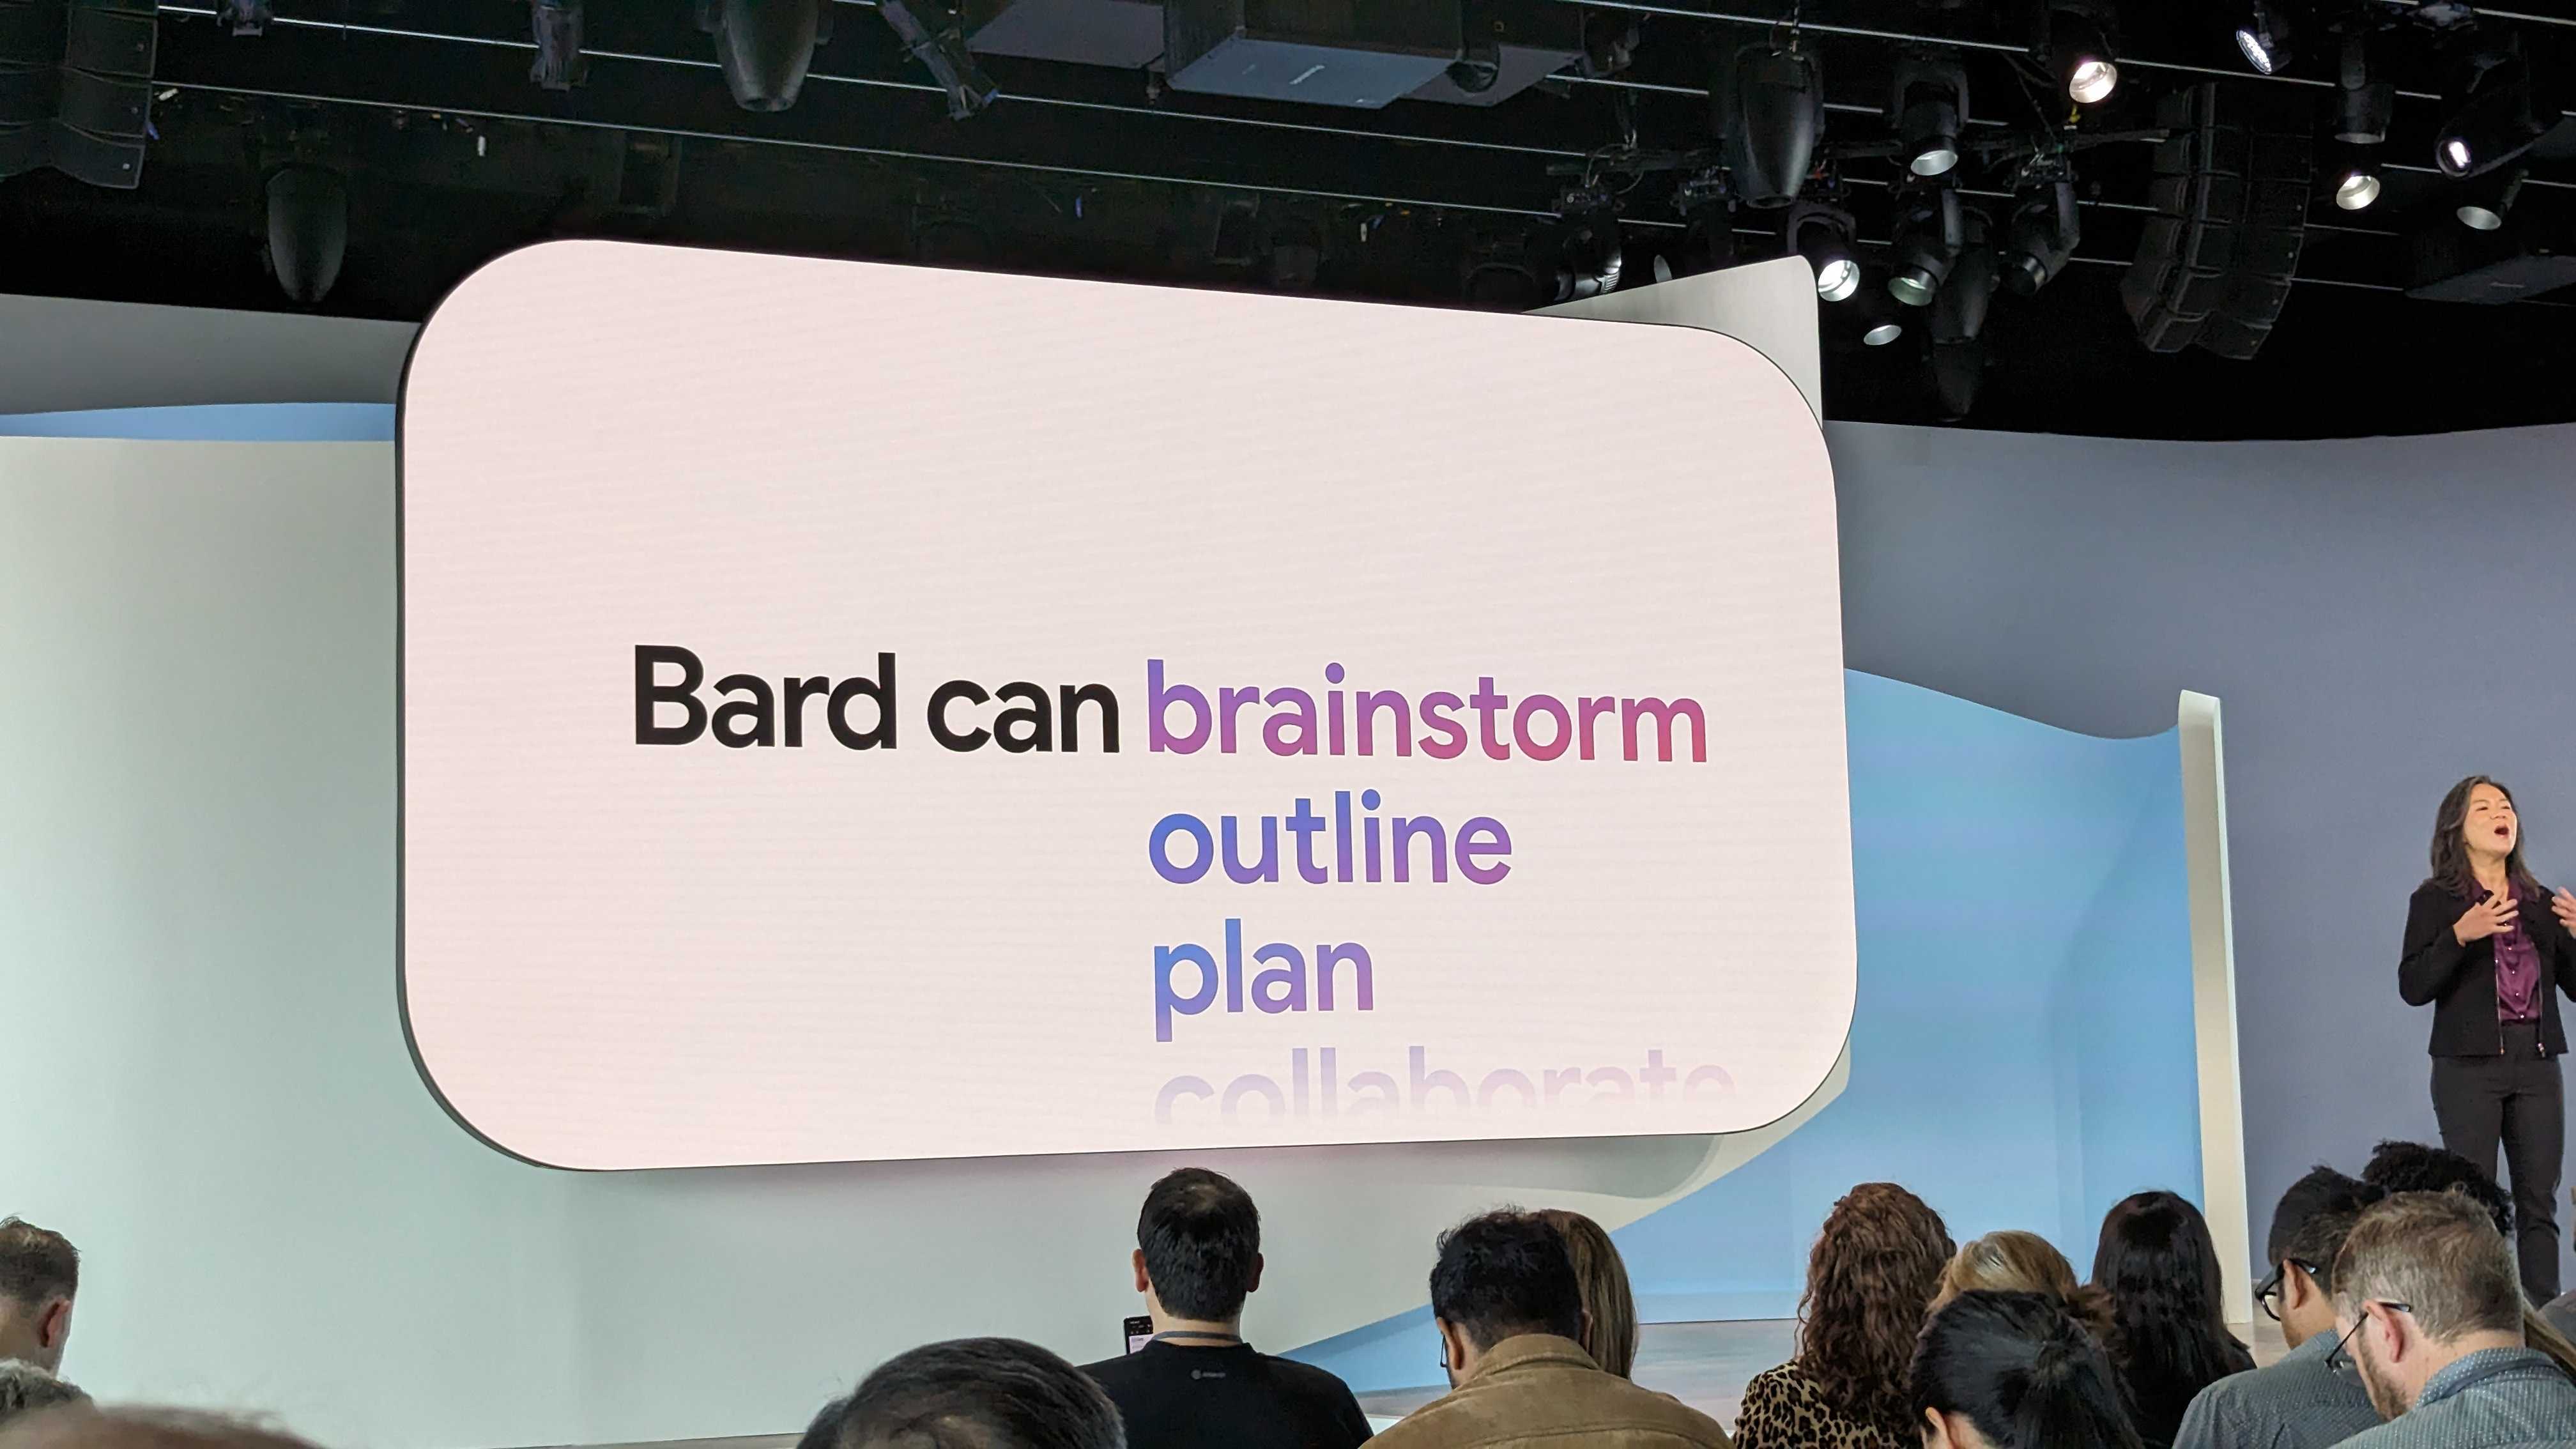 Assistant with Bard at Made by Google event